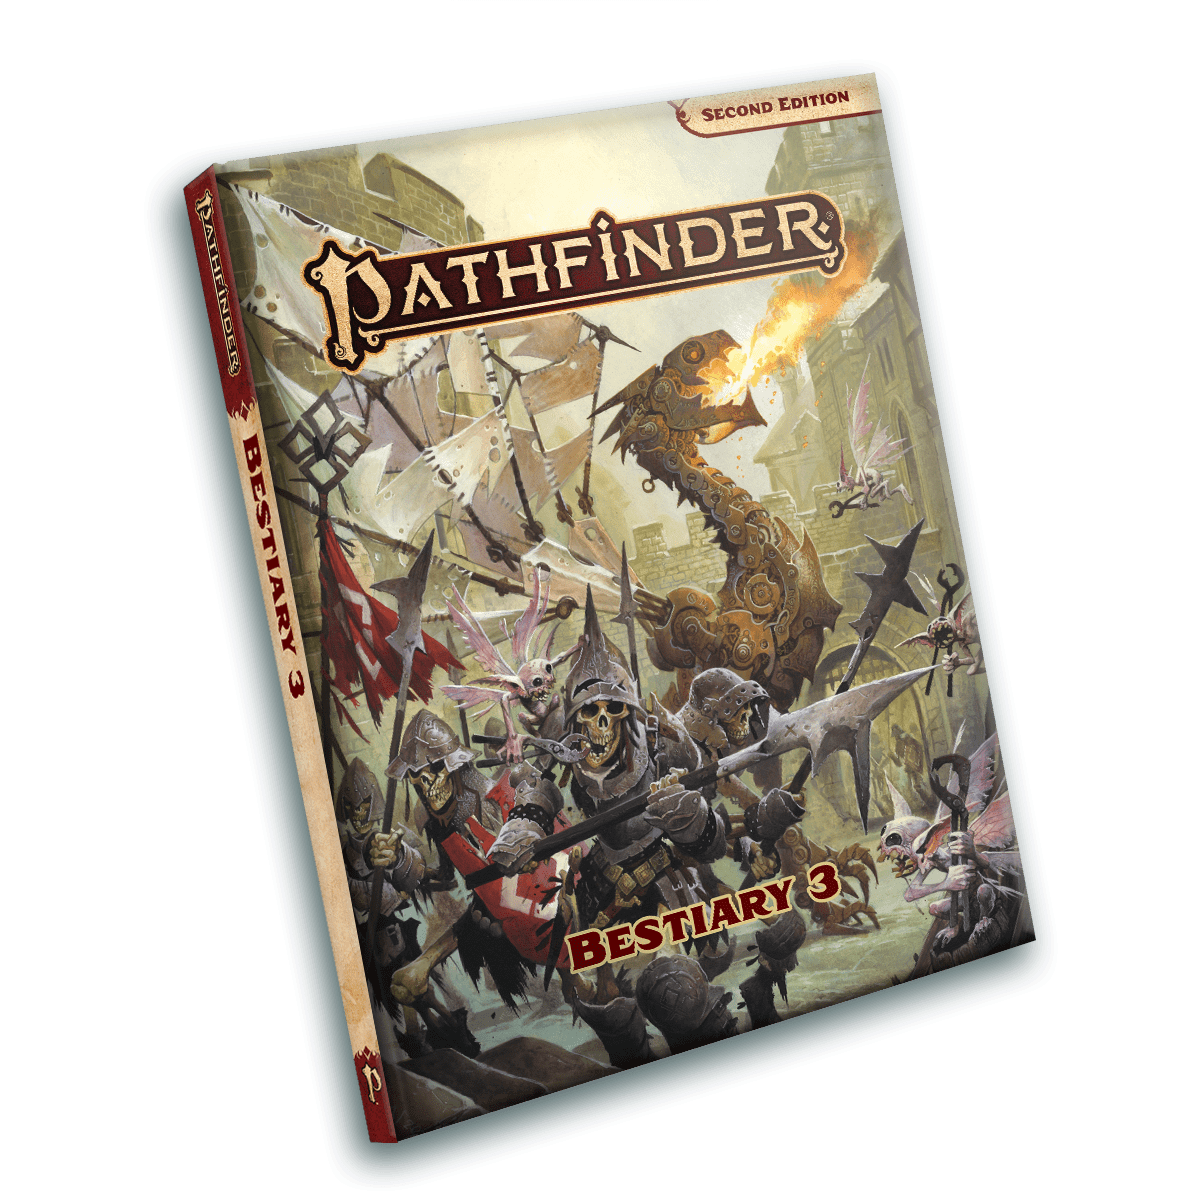 Cover Image for Pathfinder 2 Bestiary 3